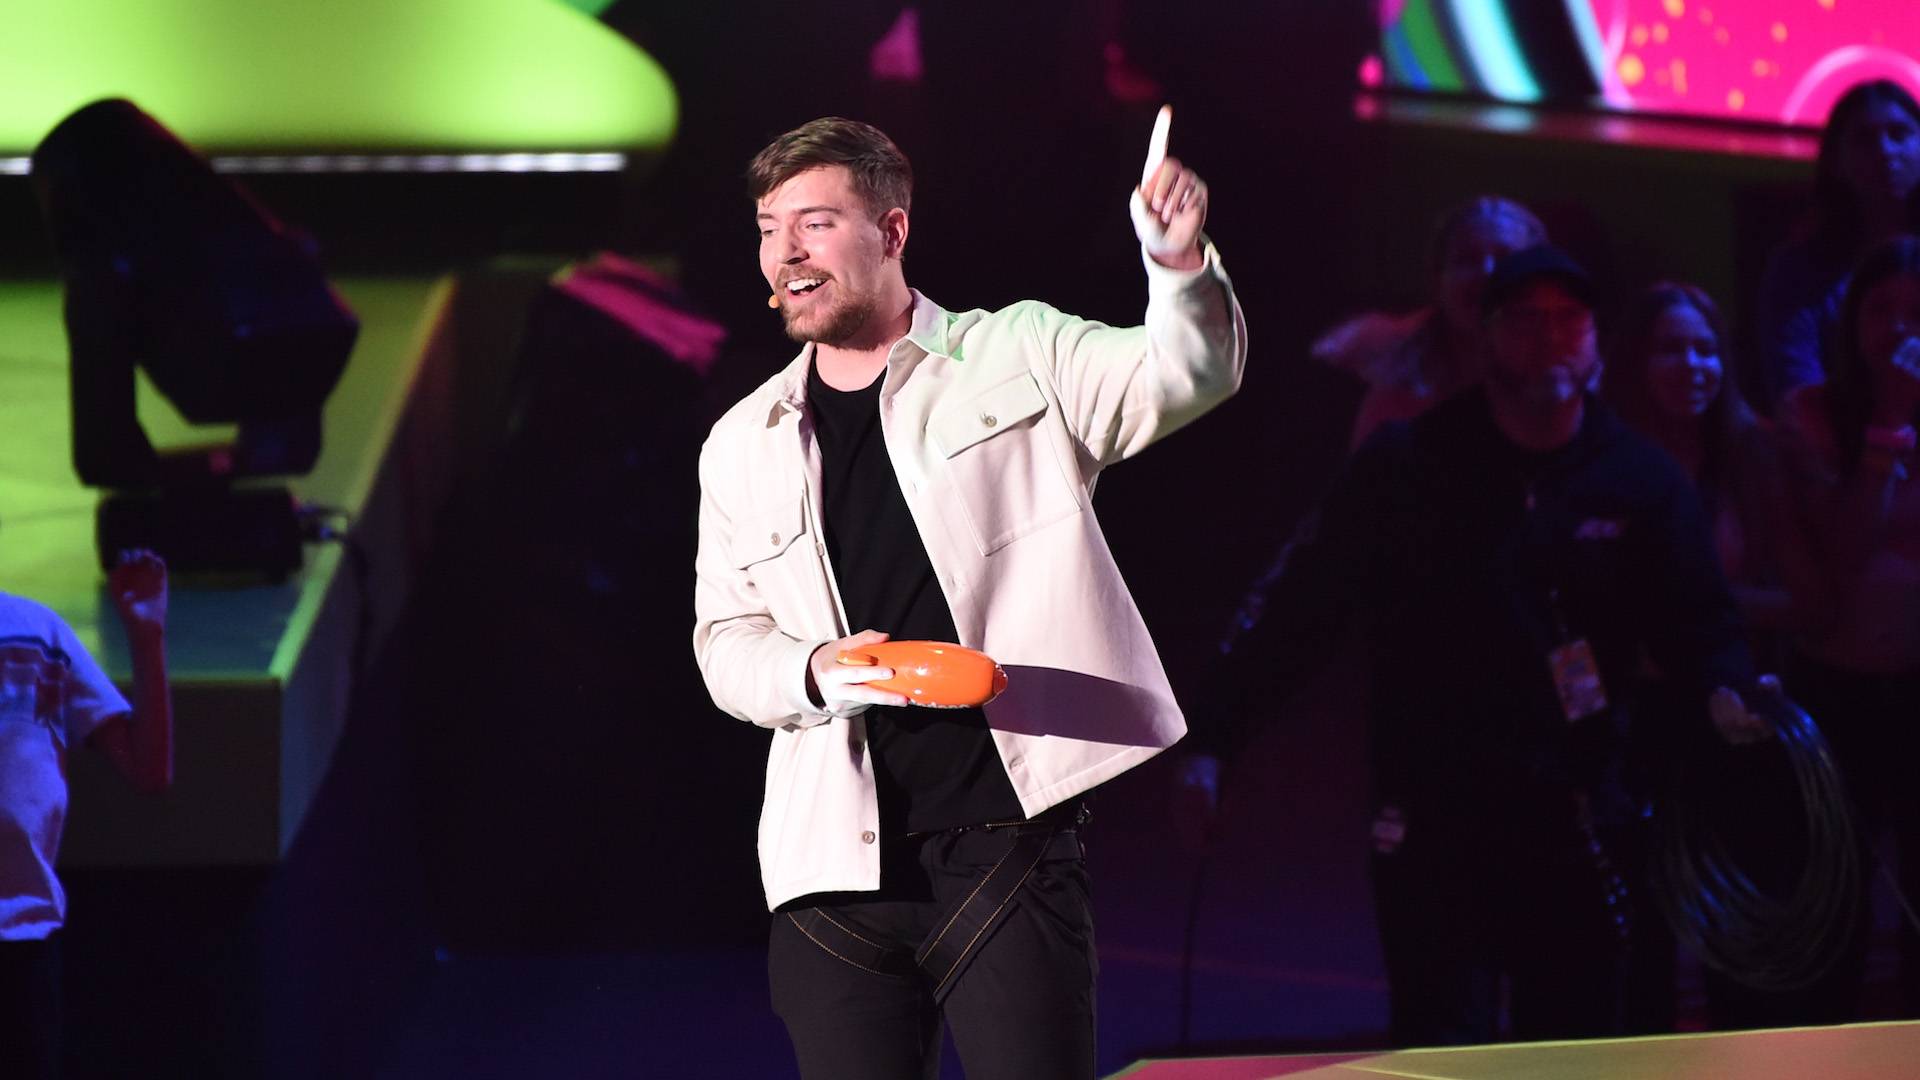 LOS ANGELES, CALIFORNIA - MARCH 04: MrBeast speaks onstage during the 2023 Nickelodeon Kids' Choice Awards at Microsoft Theater on March 04, 2023 in Los Angeles, California. (Photo by Alberto E. Rodriguez/Getty Images)